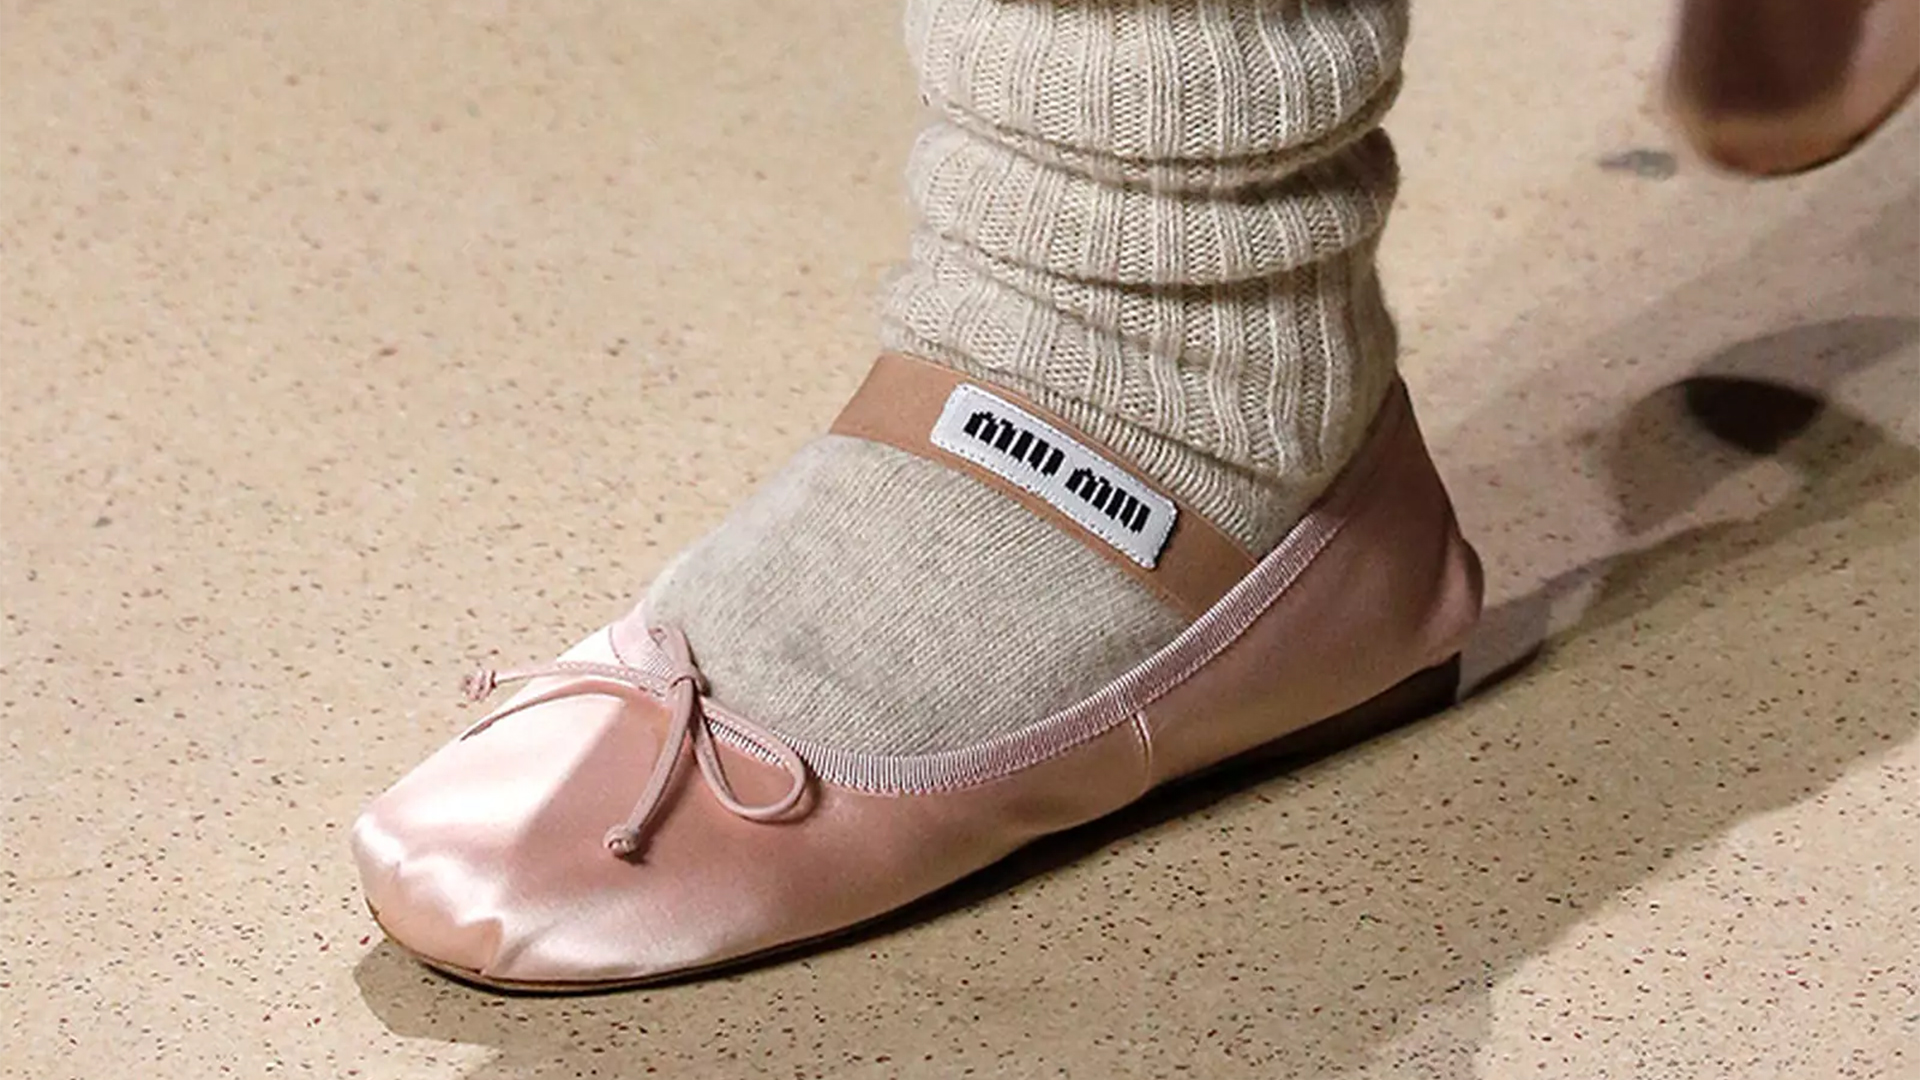 Lyst announces Miu Miu's ballet flats as product of year - TheIndustry.fashion